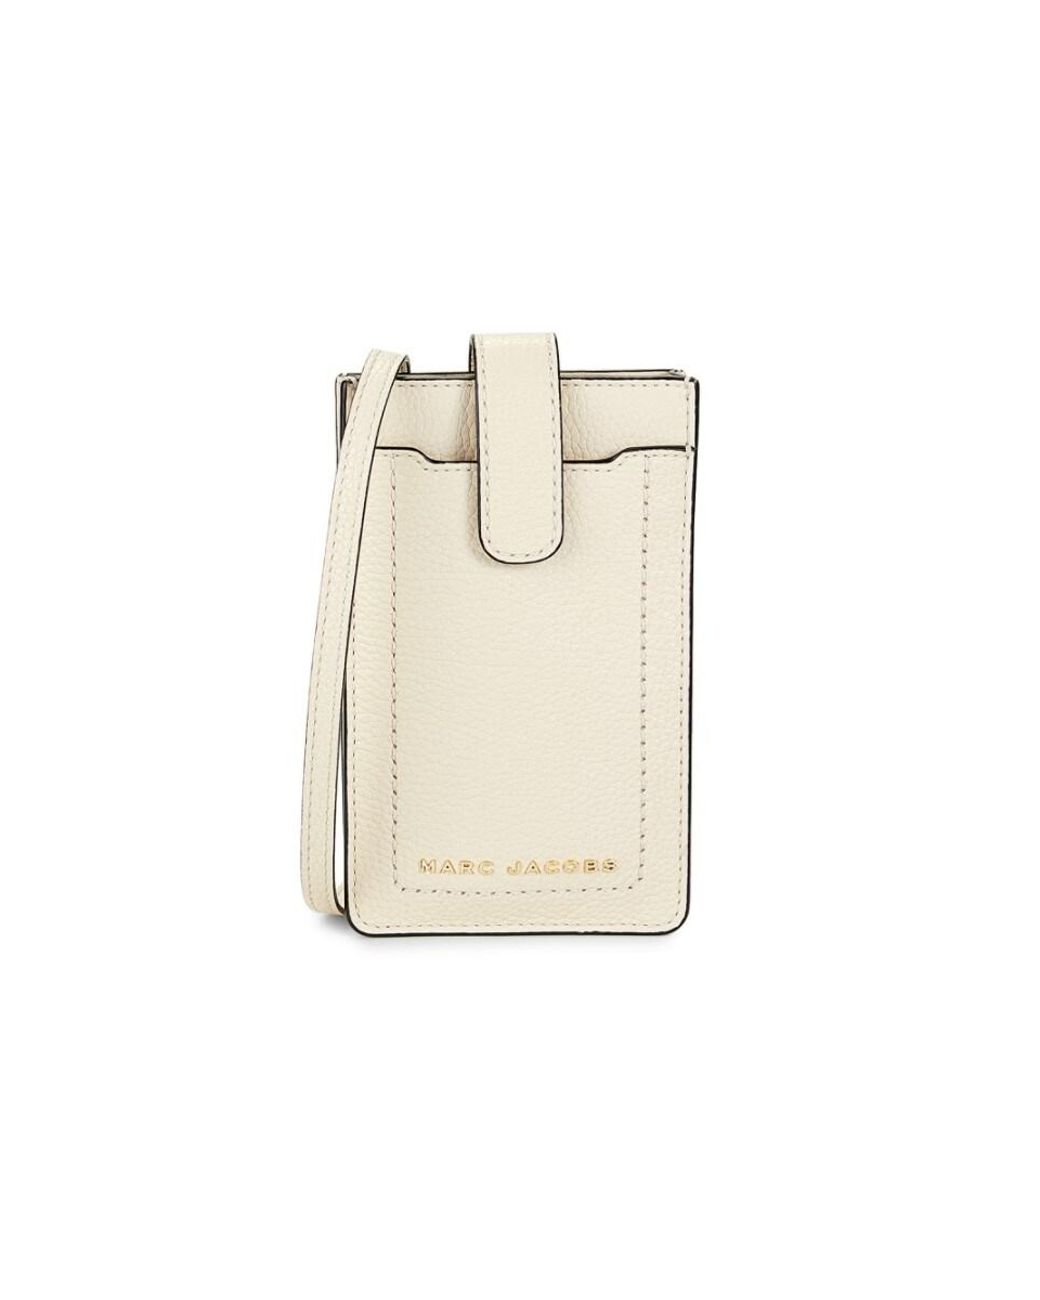 Marc Jacobs Women's Ns Leather Phone Crossbody Bag - Bashful in